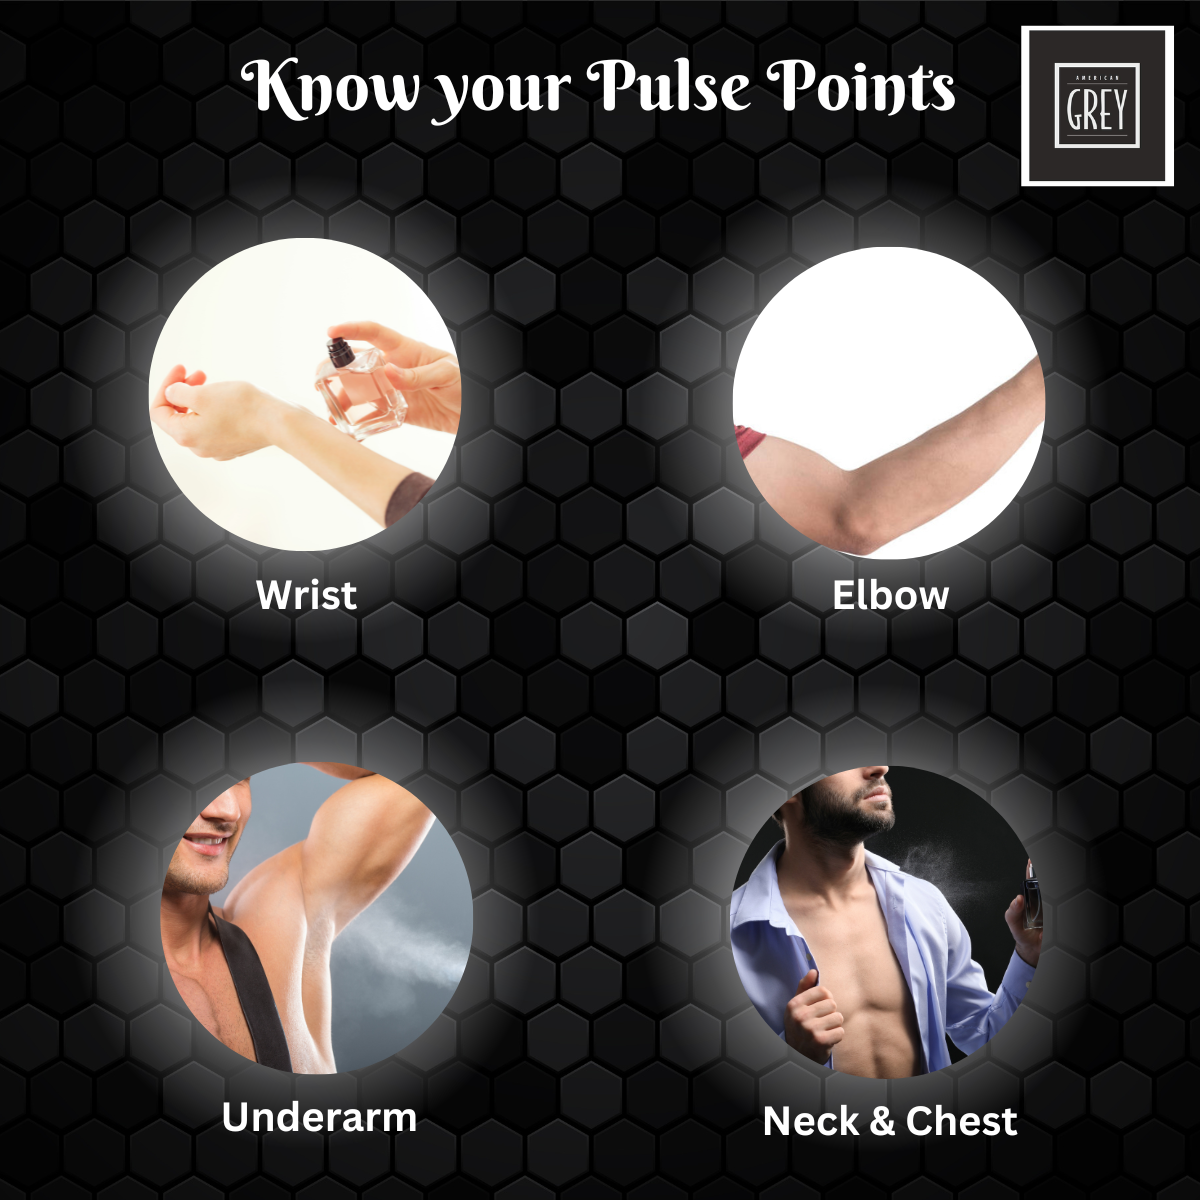 know your pulse points, pulse points, american grey intenso noir deo, deo spray for him, what are the pulse points to apply deodorant for men, men deodorant, deodorant spray for men, what are the pulse points for perfume male, what is the best way to apply deodorant for men,where are male pulse points, deodorant tips for men, deodorant tips for male in india, deo pulse points myths, best pulse points for deo male,  top rated mens deo, men grooming essential, men fragrance for winter season, best deo for cold weather, popular winter deodorant for men